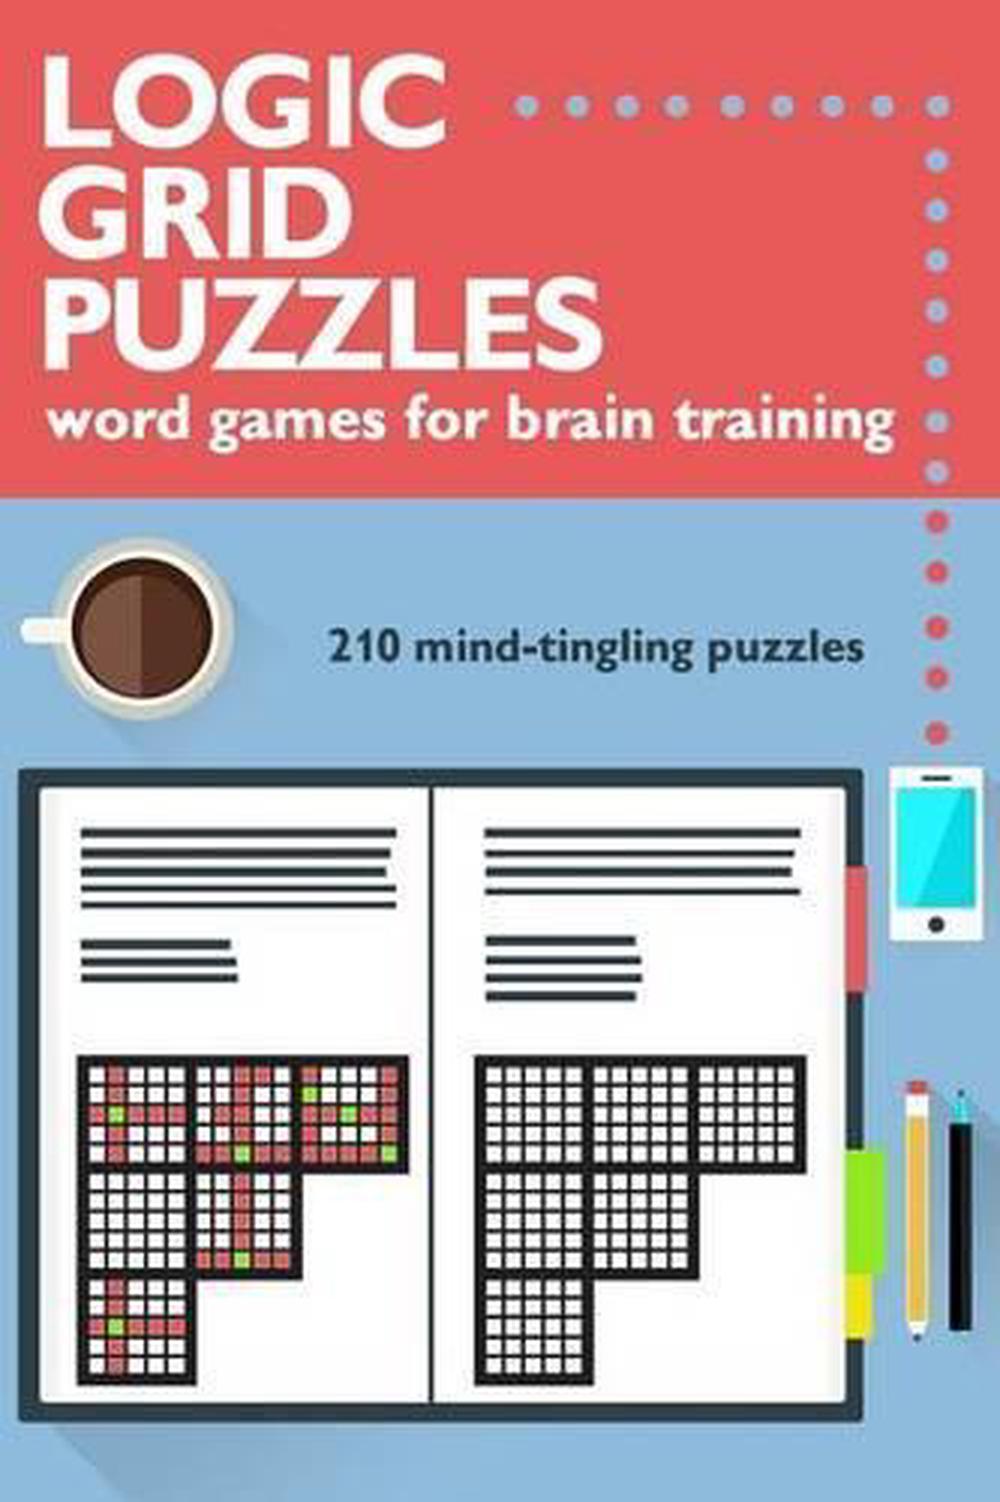 logic-grid-puzzles-word-games-for-brain-training-by-ross-mcnamara